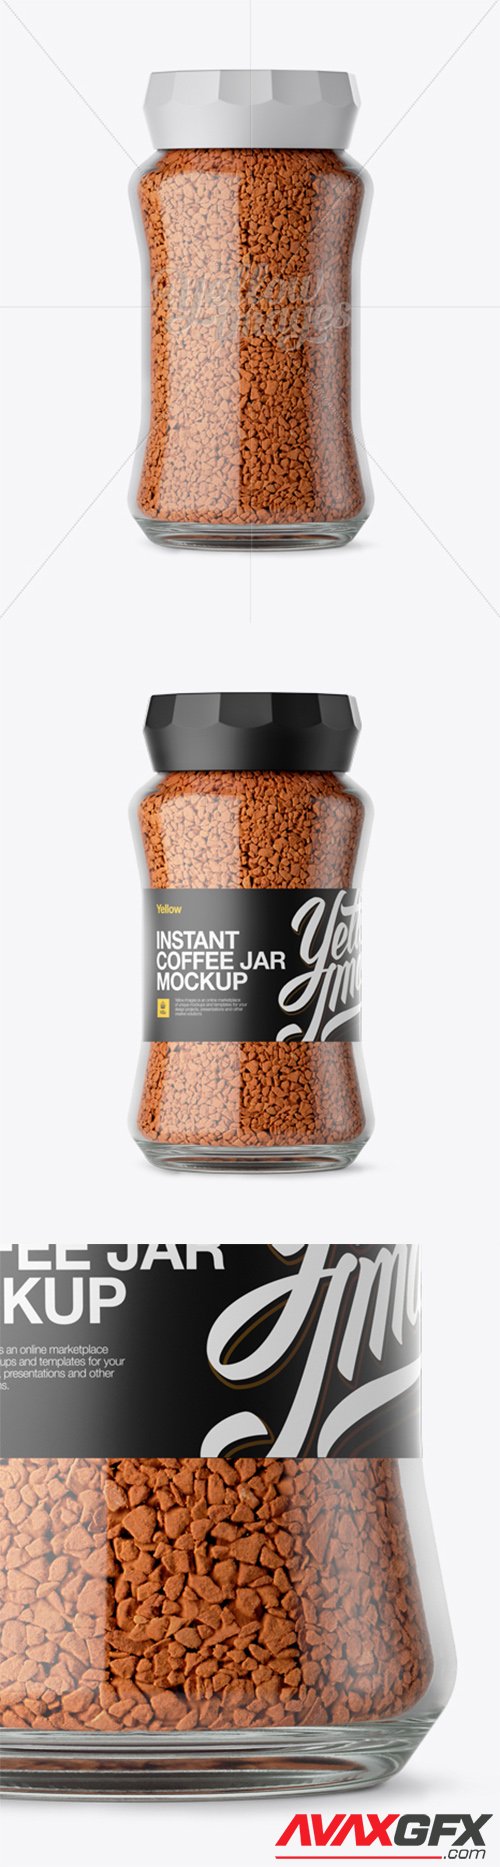 Clear Glass Jar With Instant Coffee Mockup 13617